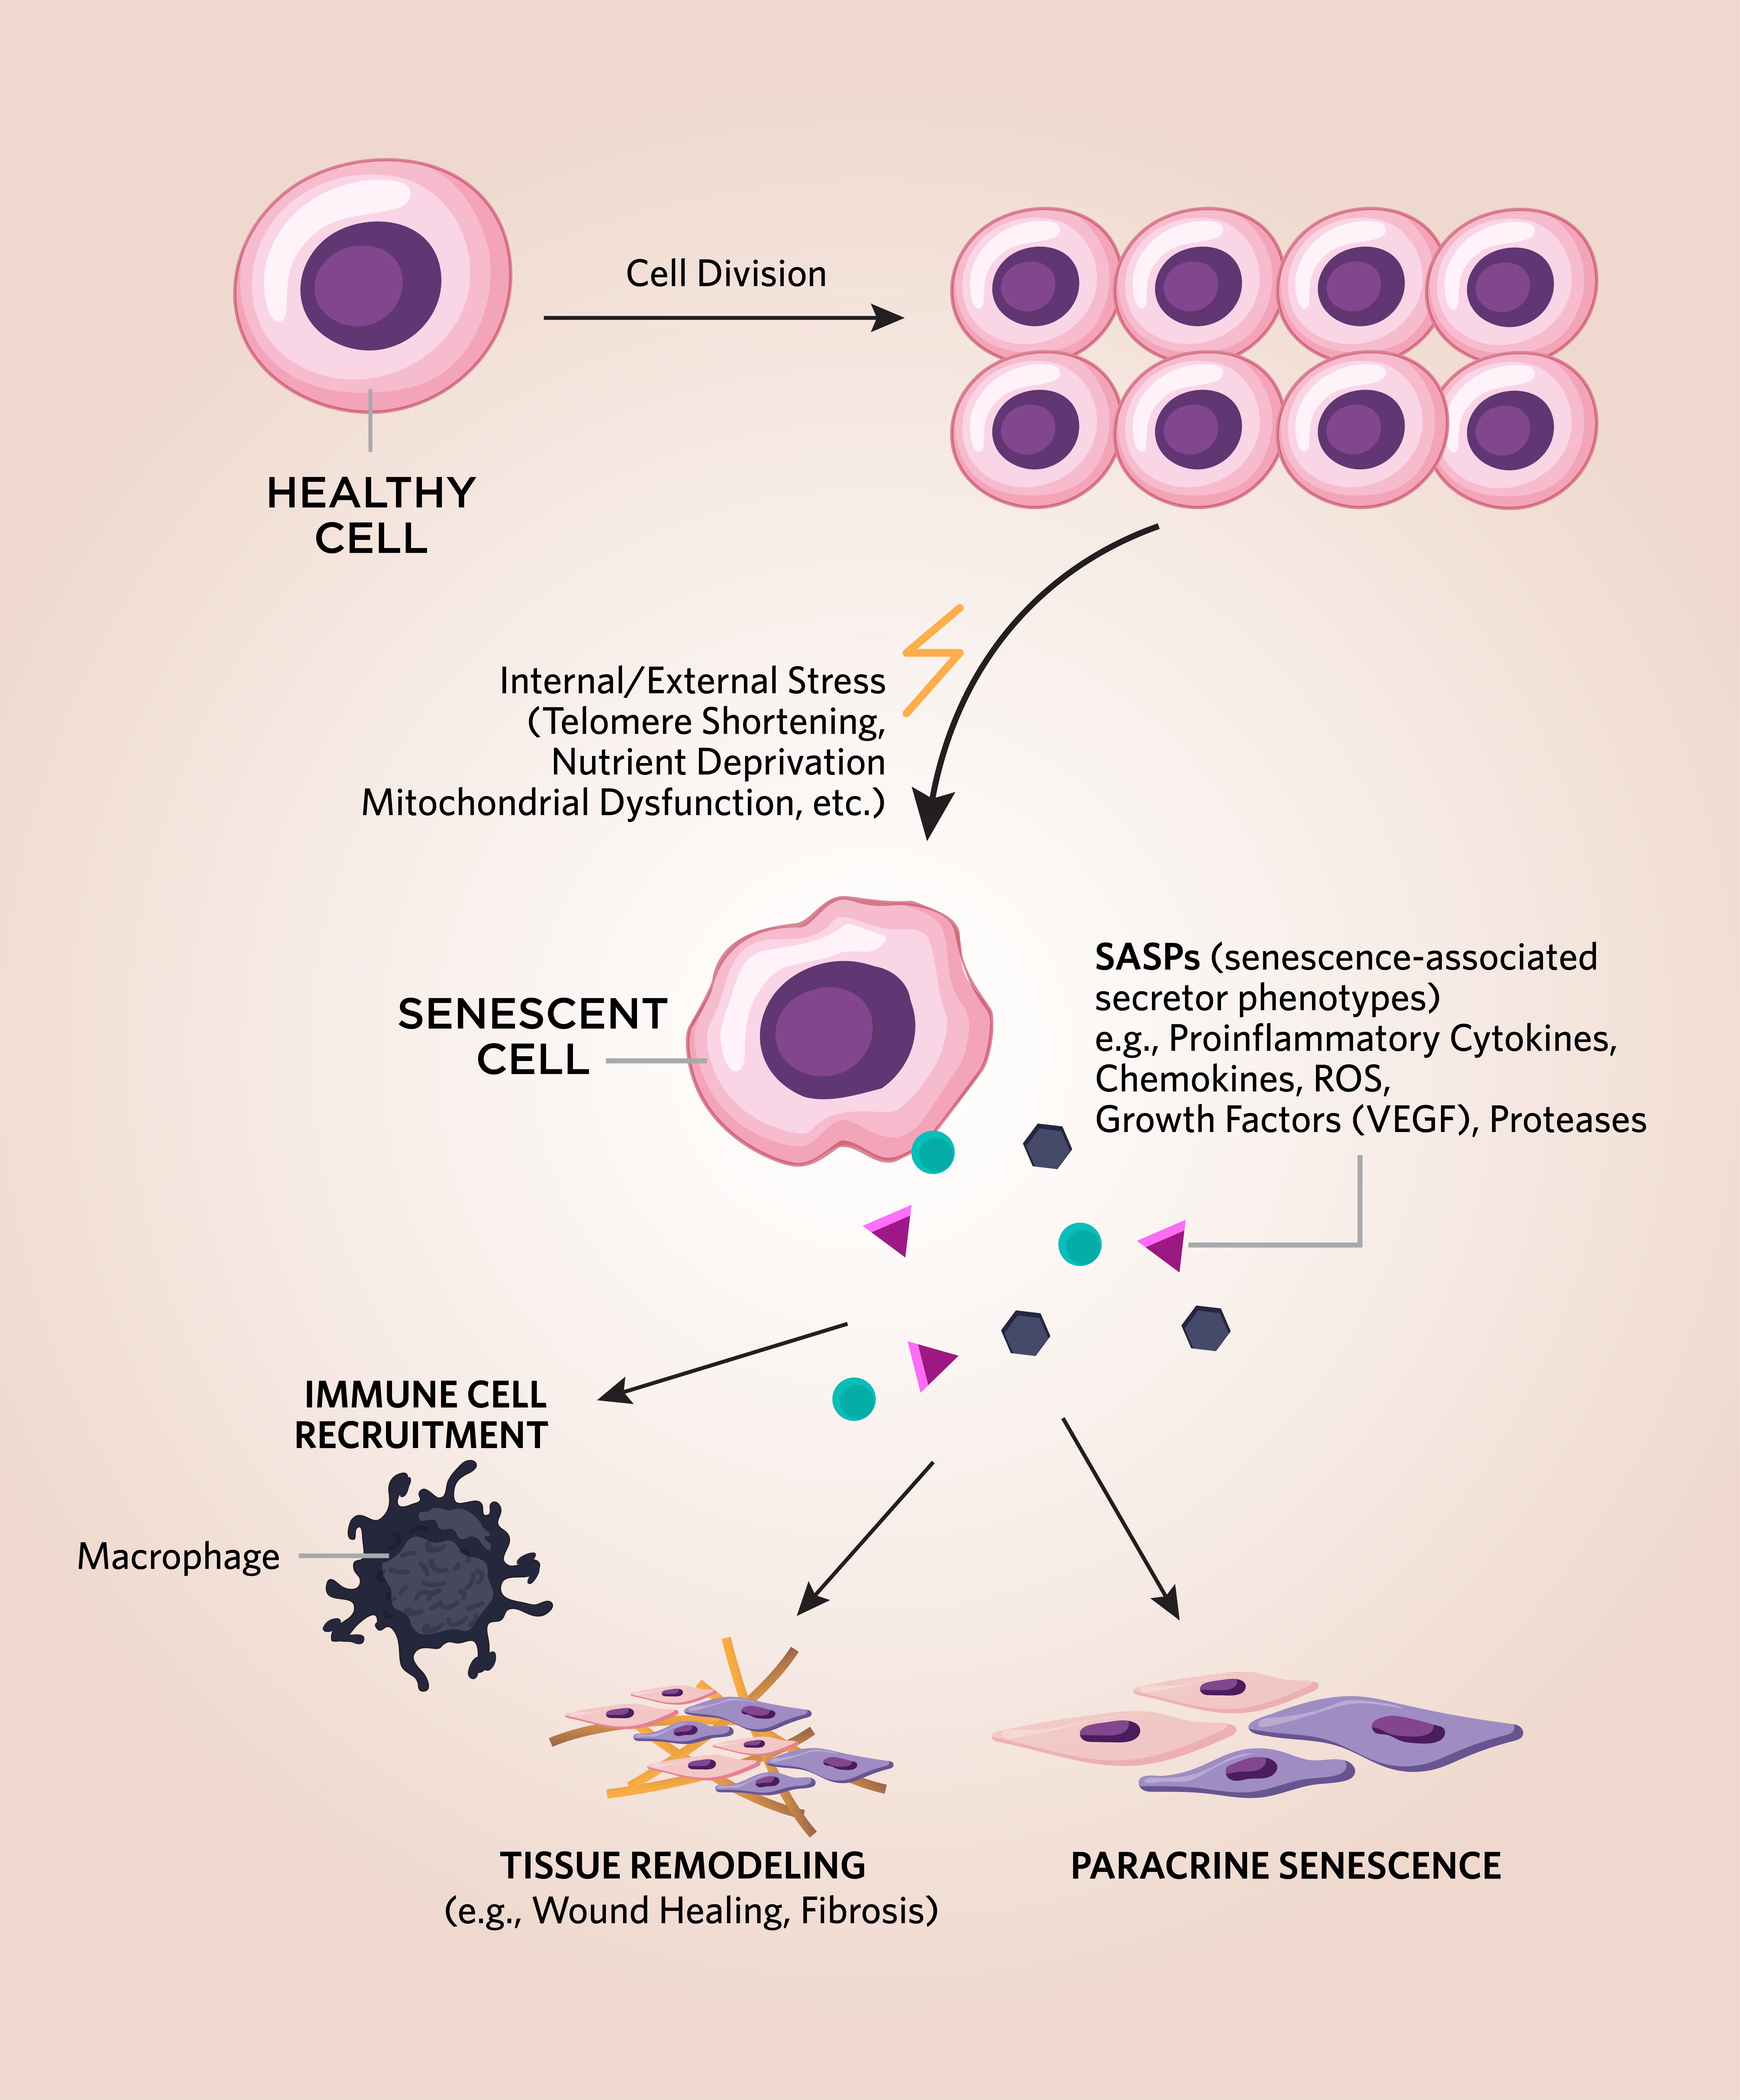 The process of a healthy cell undergoing senescence, where it stops dividing and undergoes immune cell recruitment, tissue remodeling, or paracrine signaling.